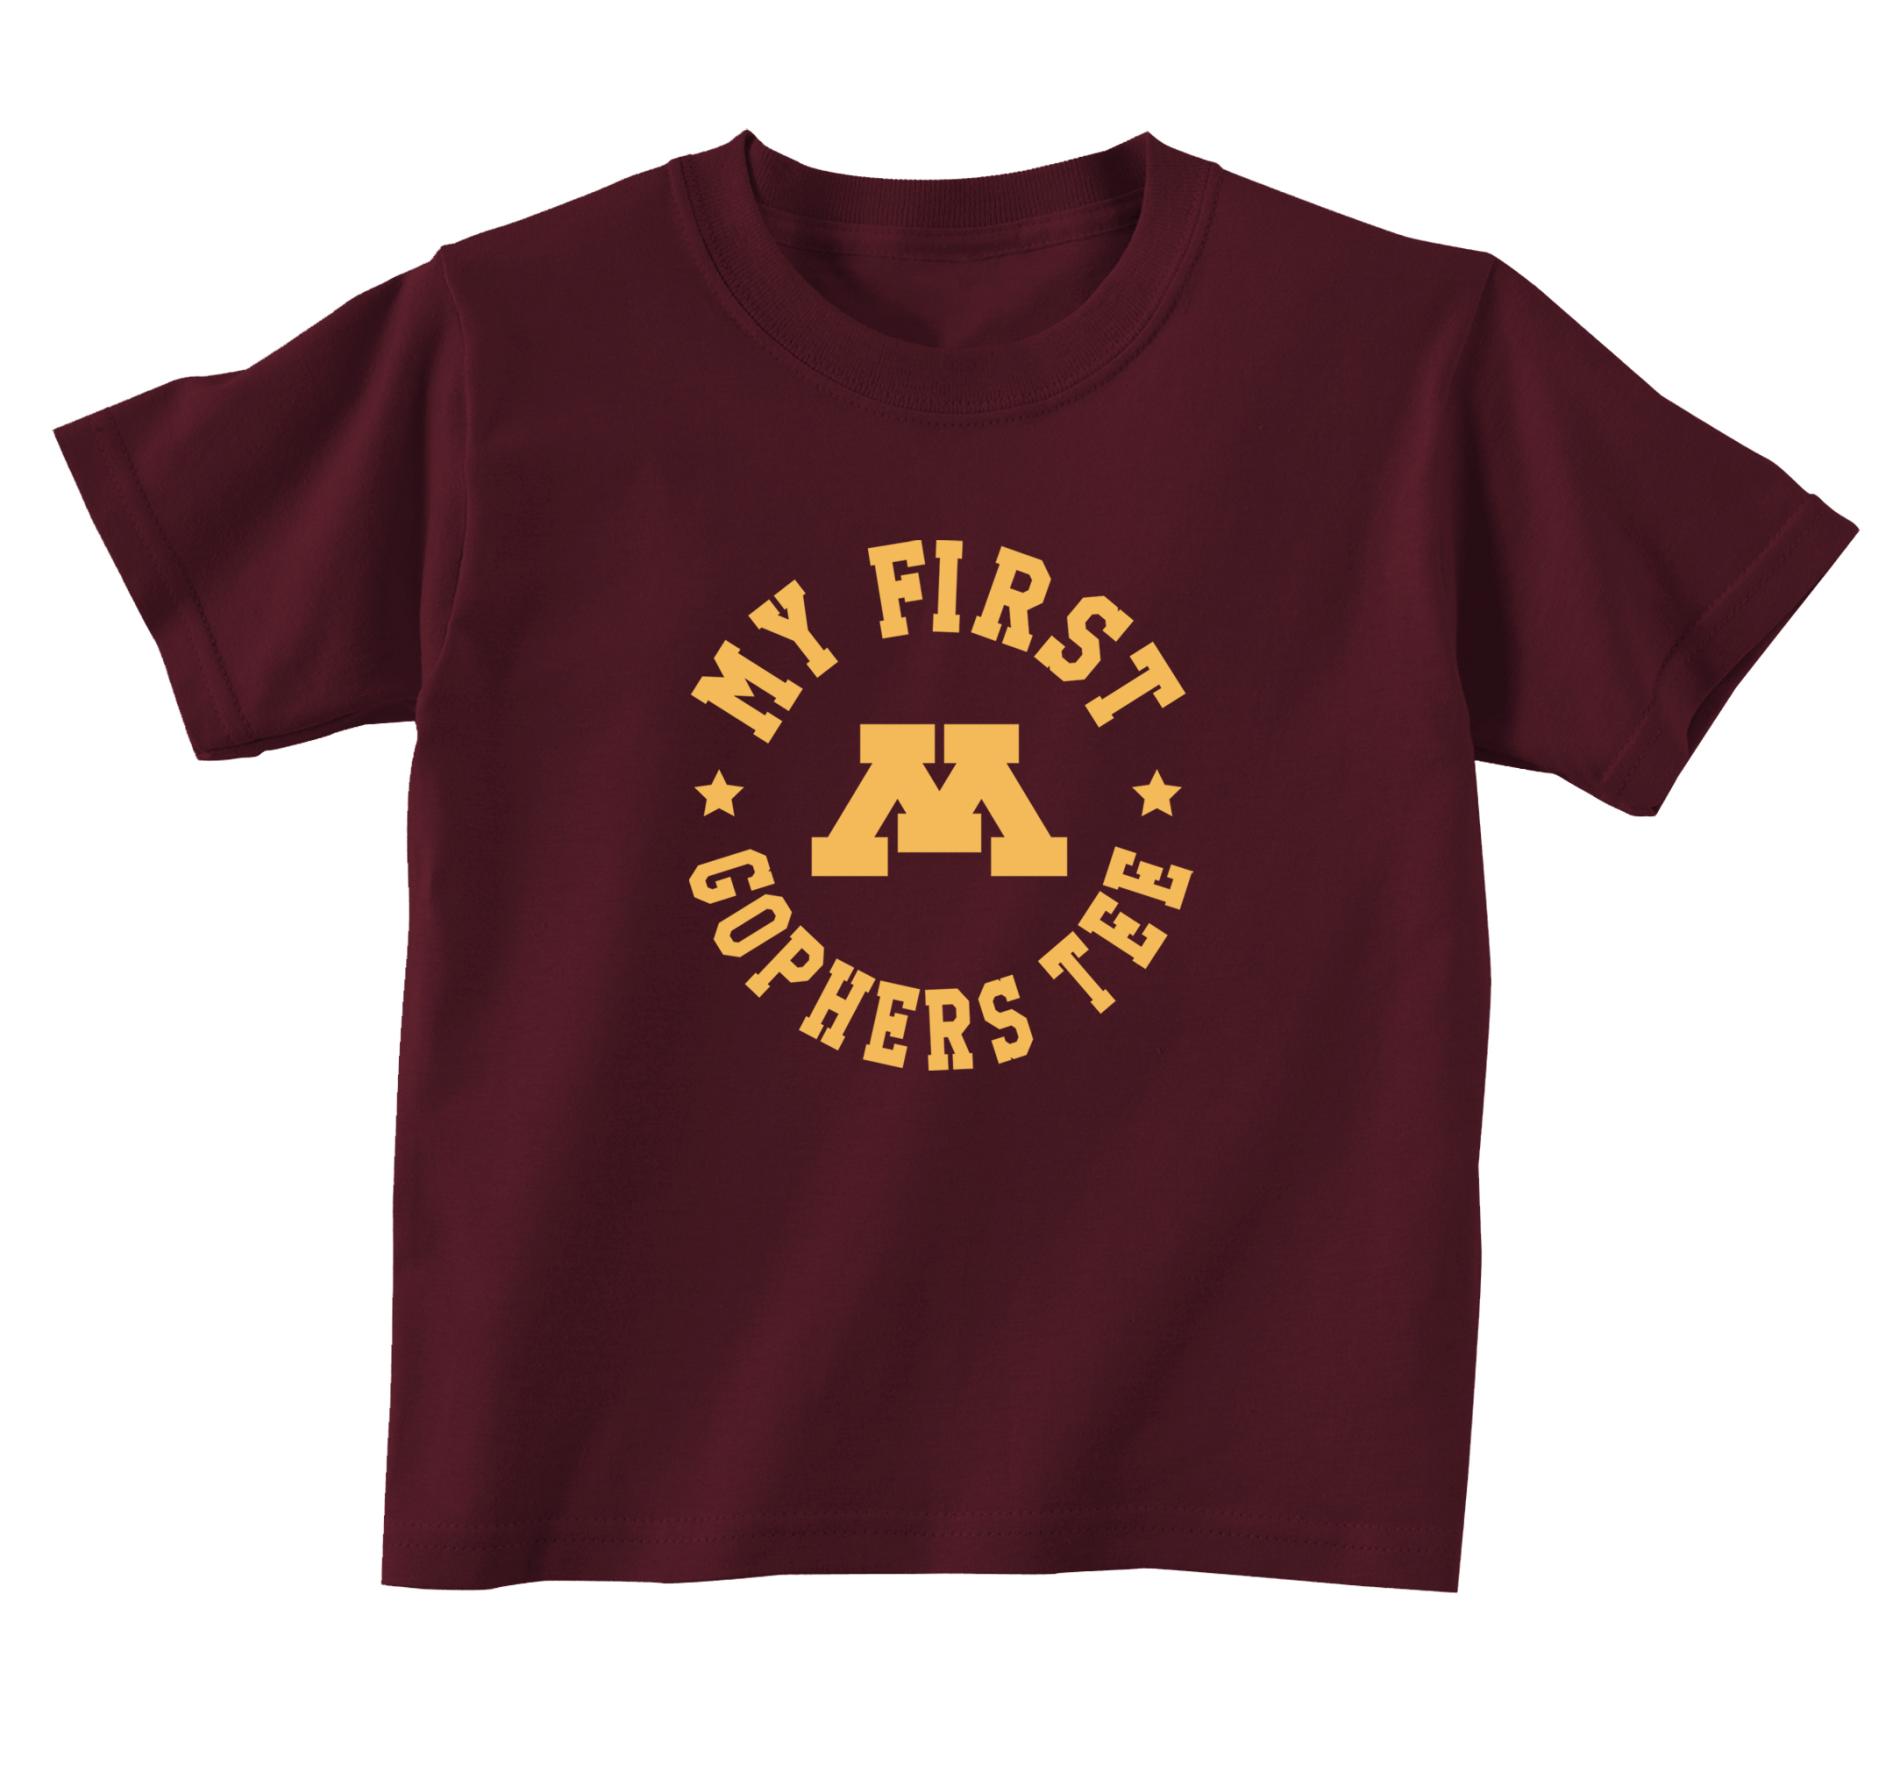 NCAA Toddlers' Graphic T-Shirt - University of Minnesota Golden Gophers